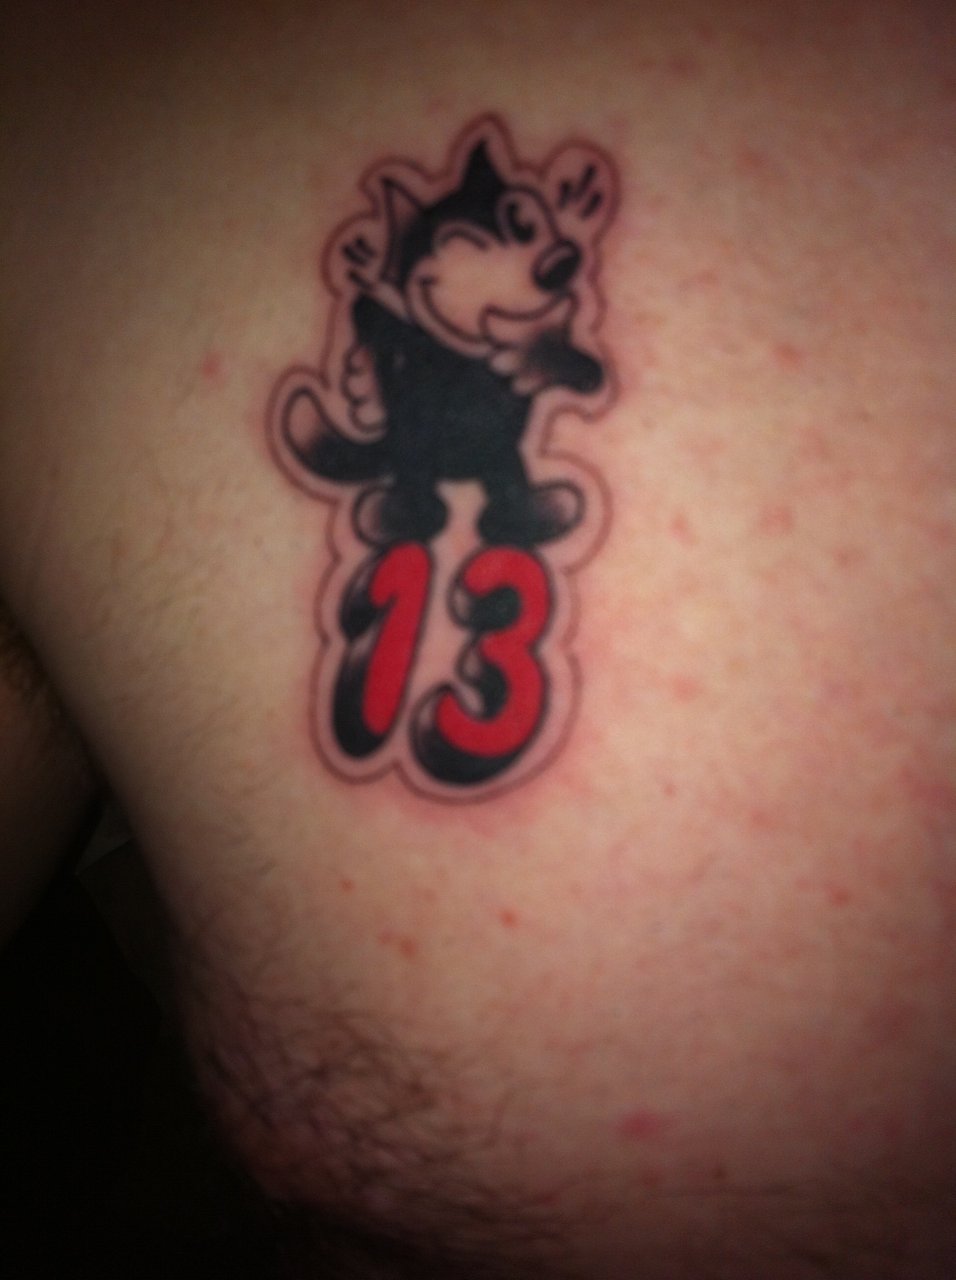 Black Cat 13 by #BillyFerrier at #GraceTattoo #SailorJerry  #TraditionalTattoos #BlackCat13 | Black cat tattoos, 13 tattoos, Tattoos  with meaning